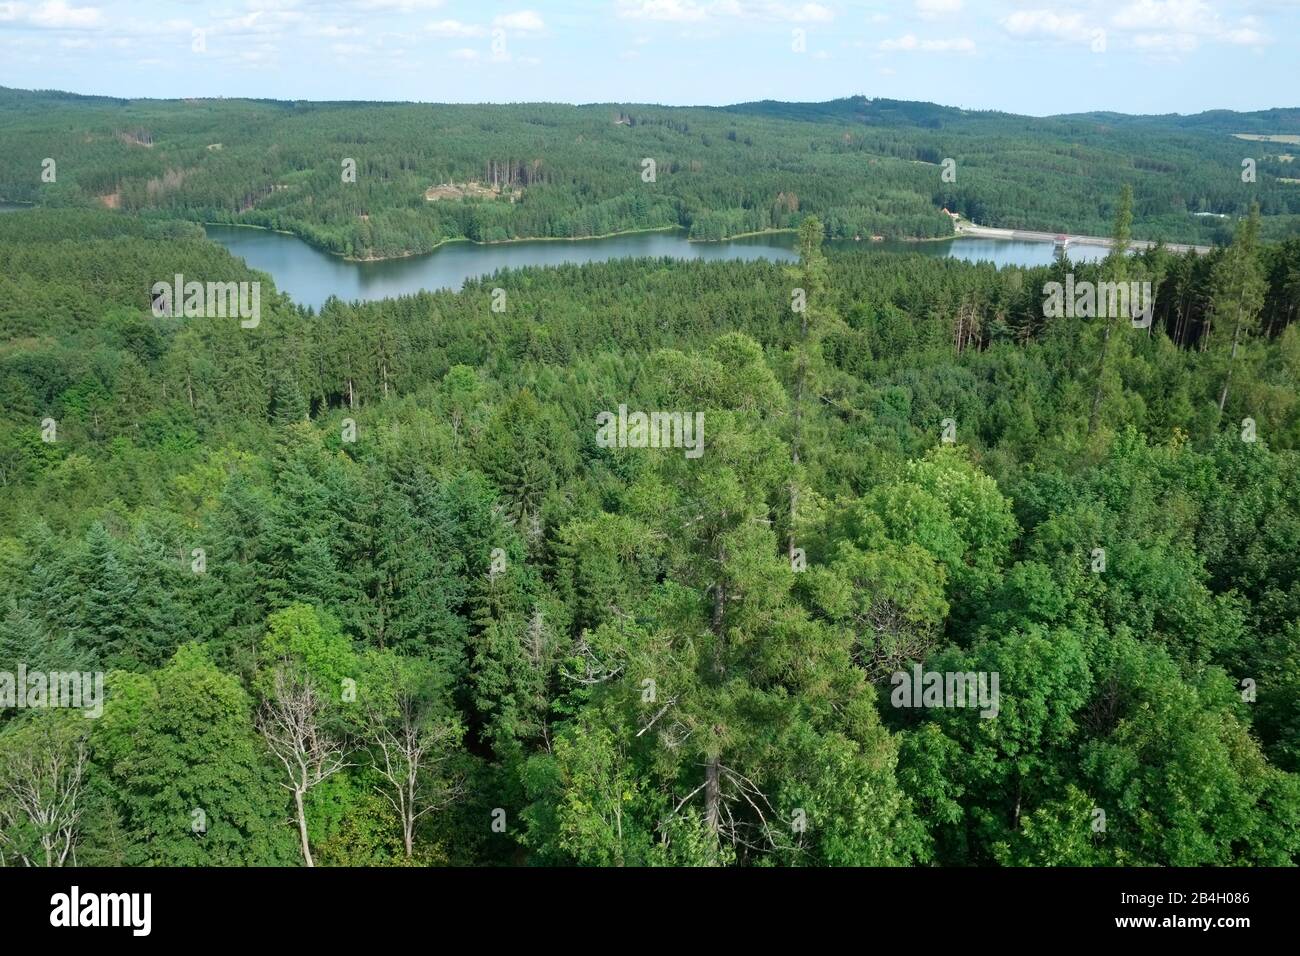 Landstejn water reservoir, in the midsts of Czech Canada, supplies drinking water to several townships including Slavonice an d Dacice Stock Photo